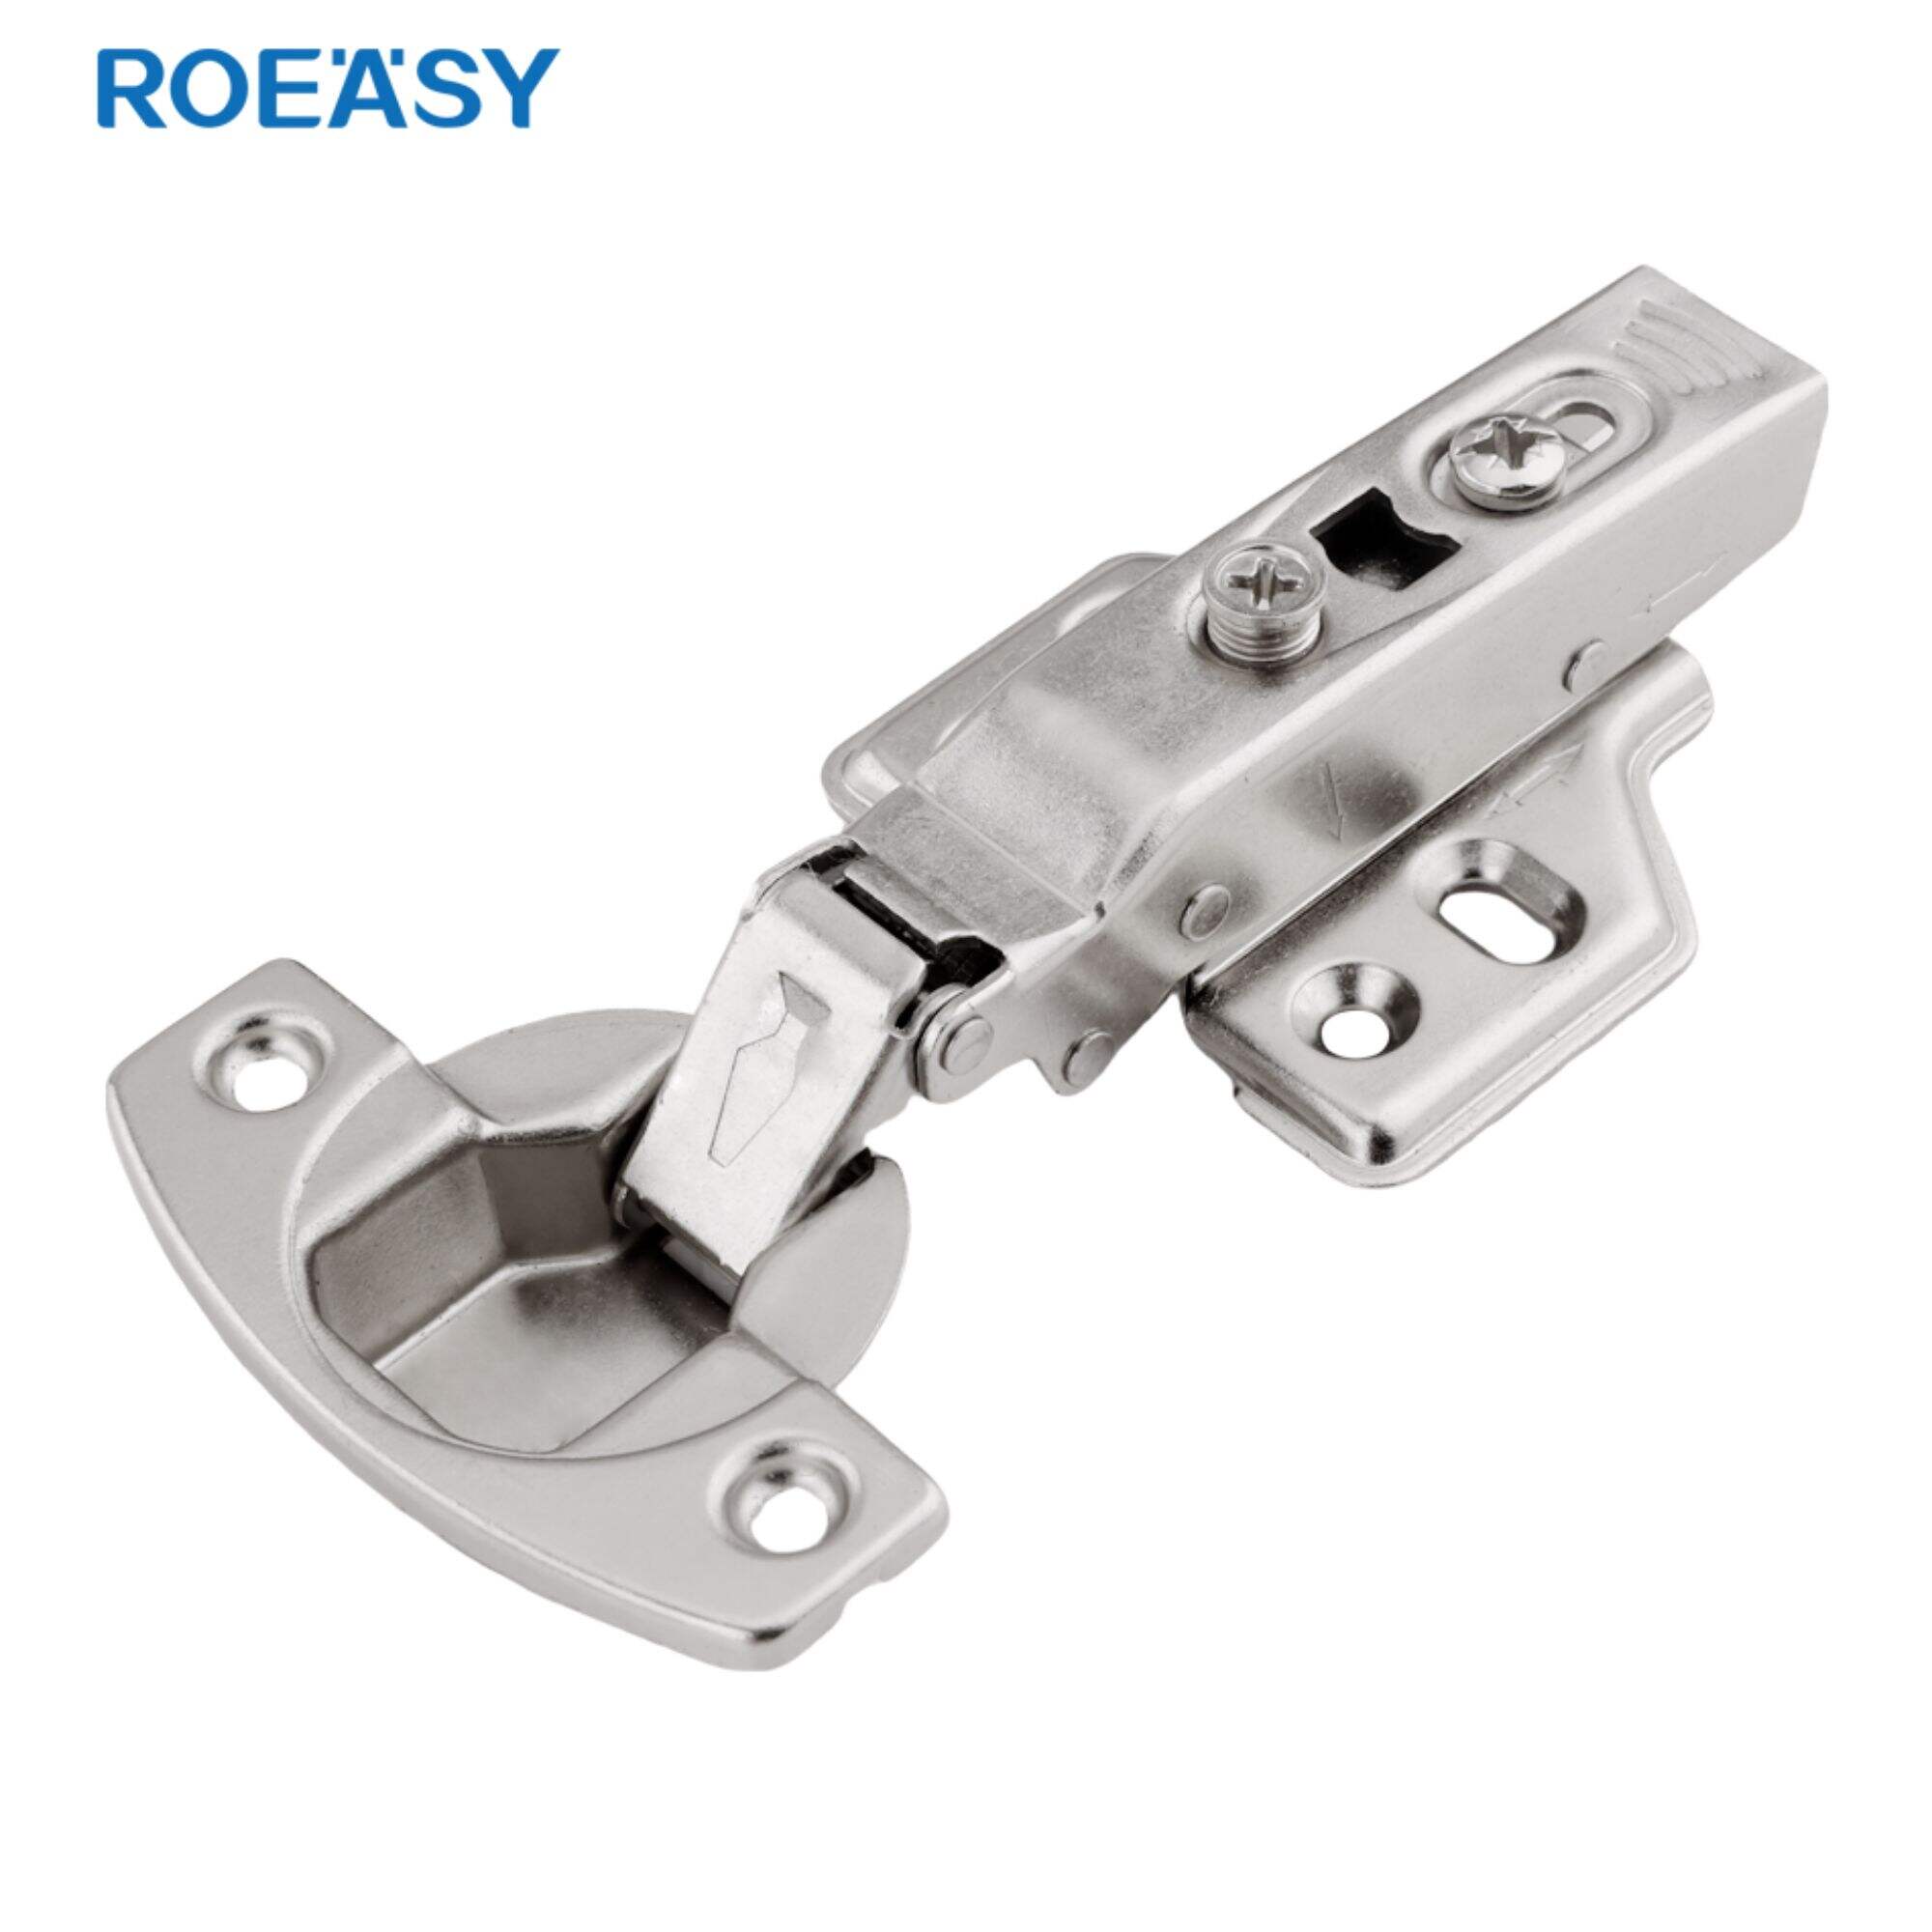 ROEASY CH-271A Cold Steel Hydraulic Three Way Soft Close Inseparable Fixed-on Hinge